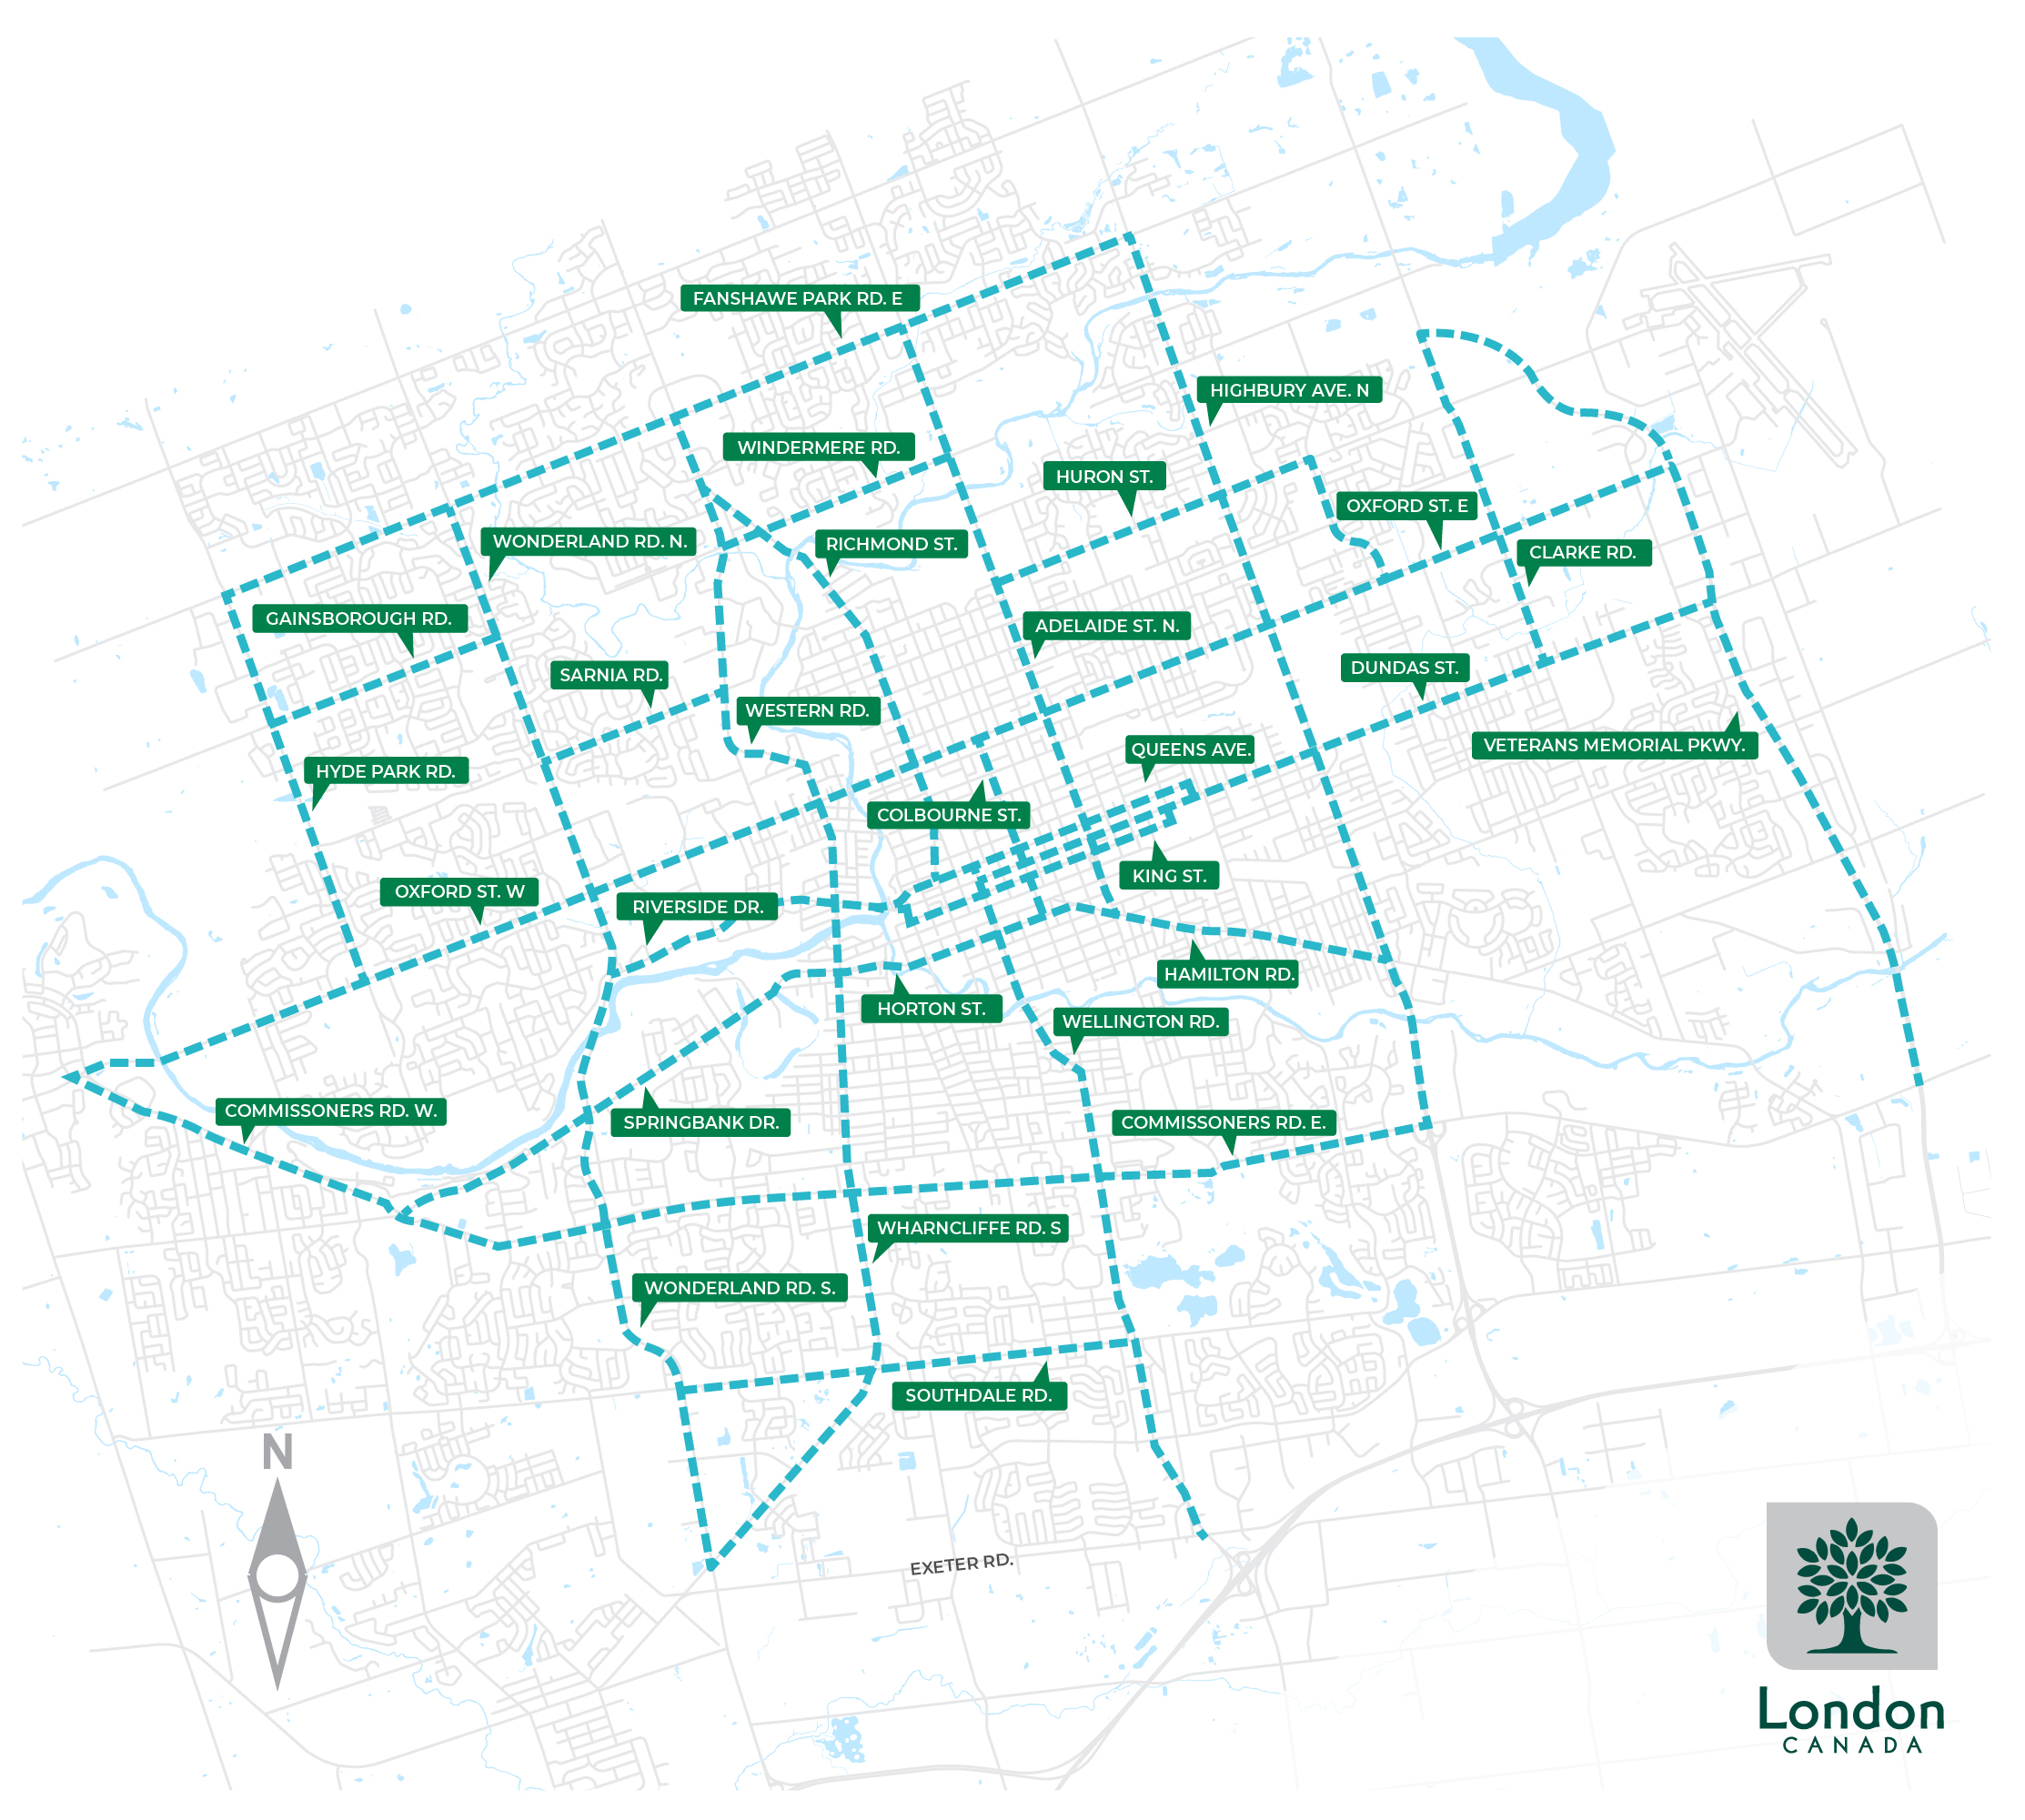 A map of intelligent traffic signal corridors in London. For more information, please contact the Traffic management centre at tmc@london.ca